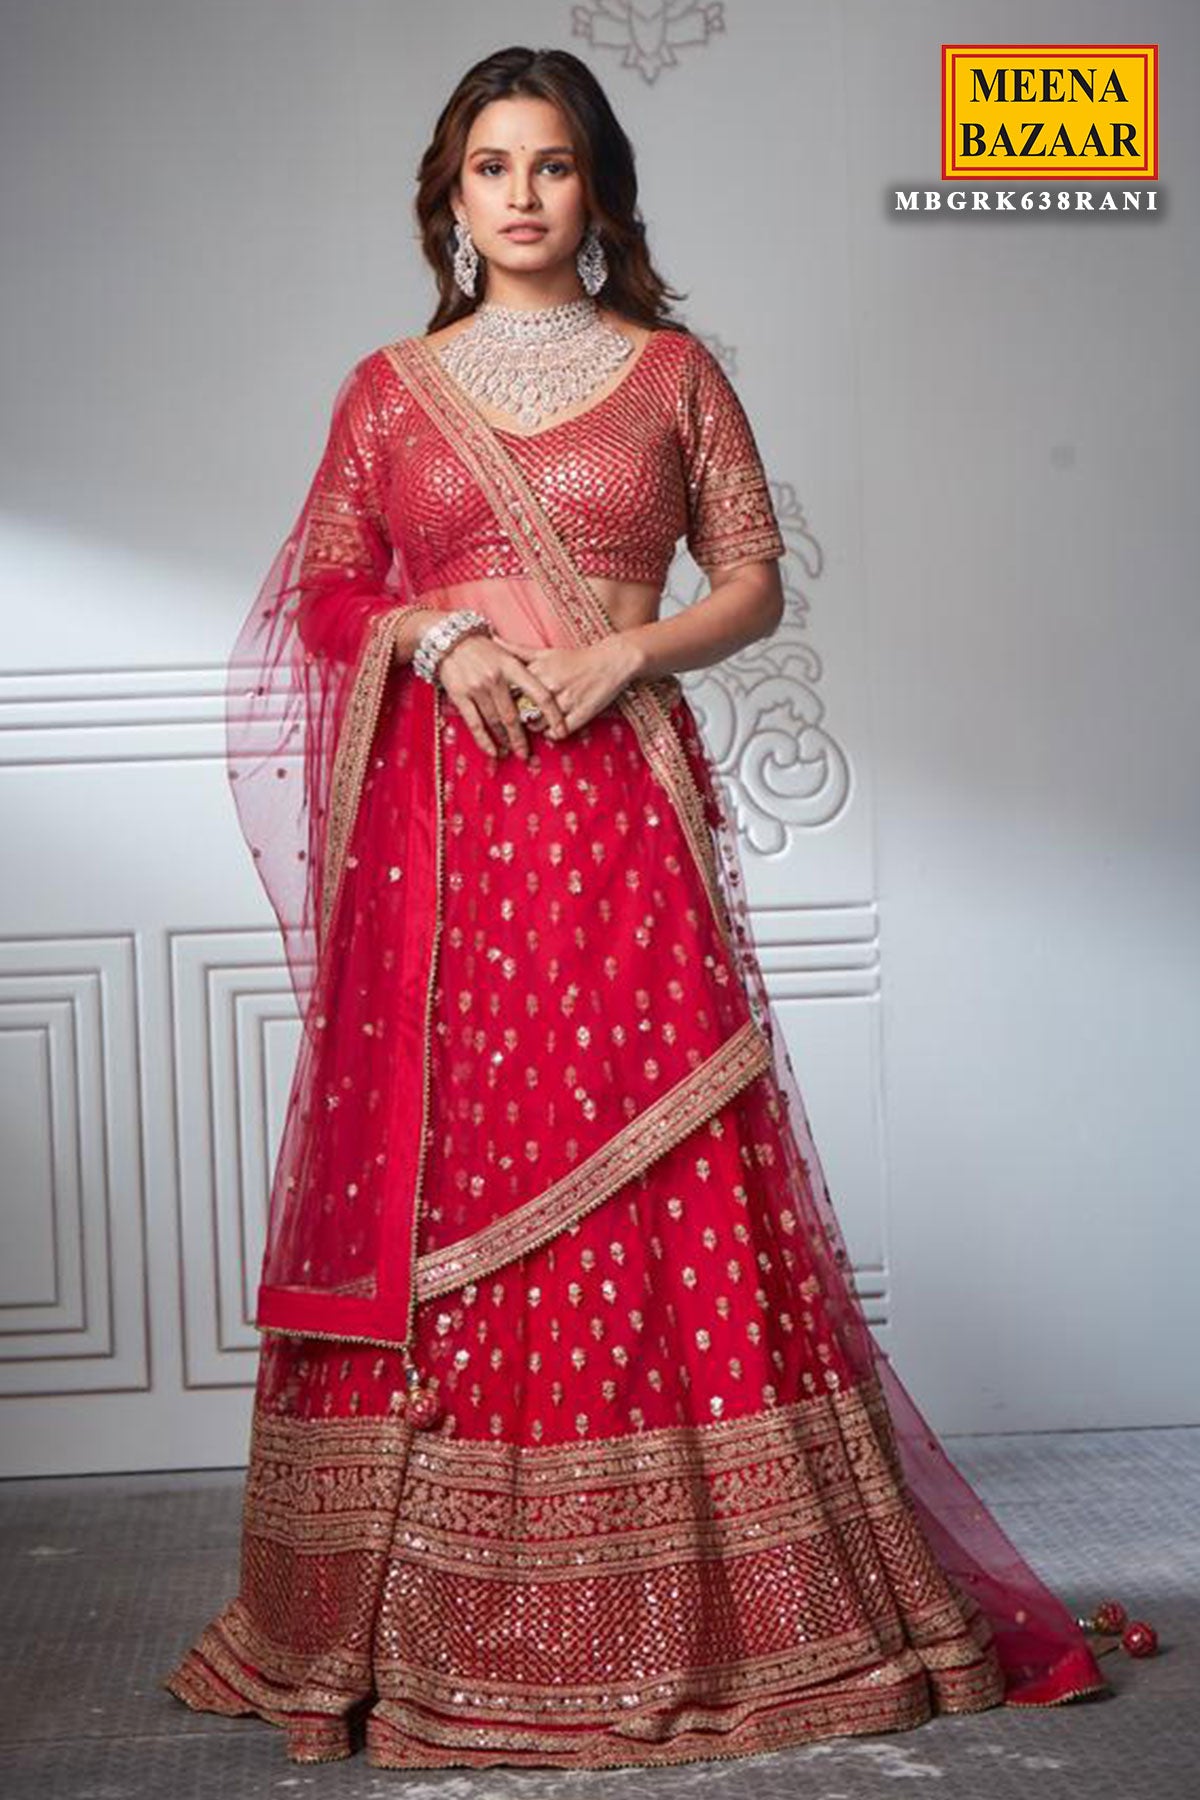 Meena Bazaar Pink & Gold-Toned Ready to Wear Lehenga & Blouse With Dupatta  Price in India, Full Specifications & Offers | DTashion.com